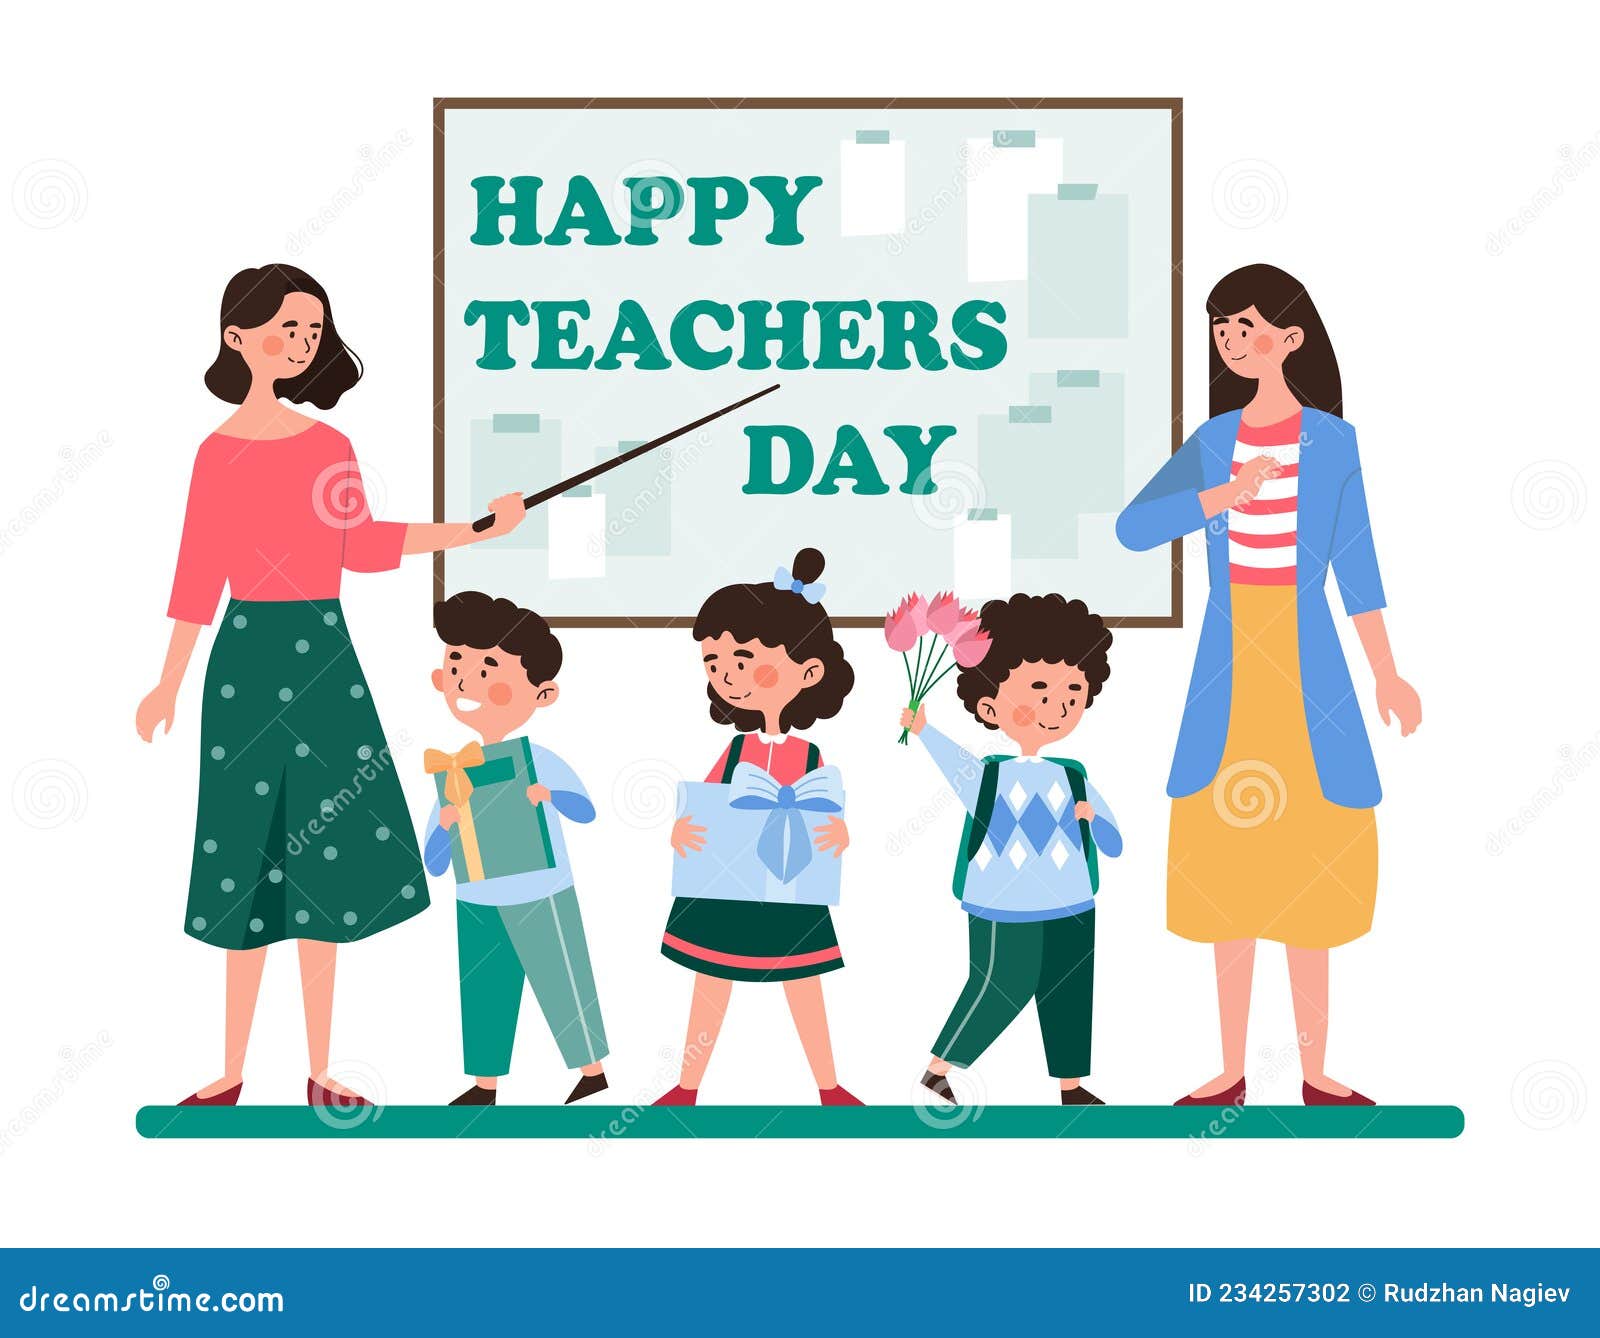 Teachers Day Drawing Ideas for School Students and Kids-saigonsouth.com.vn